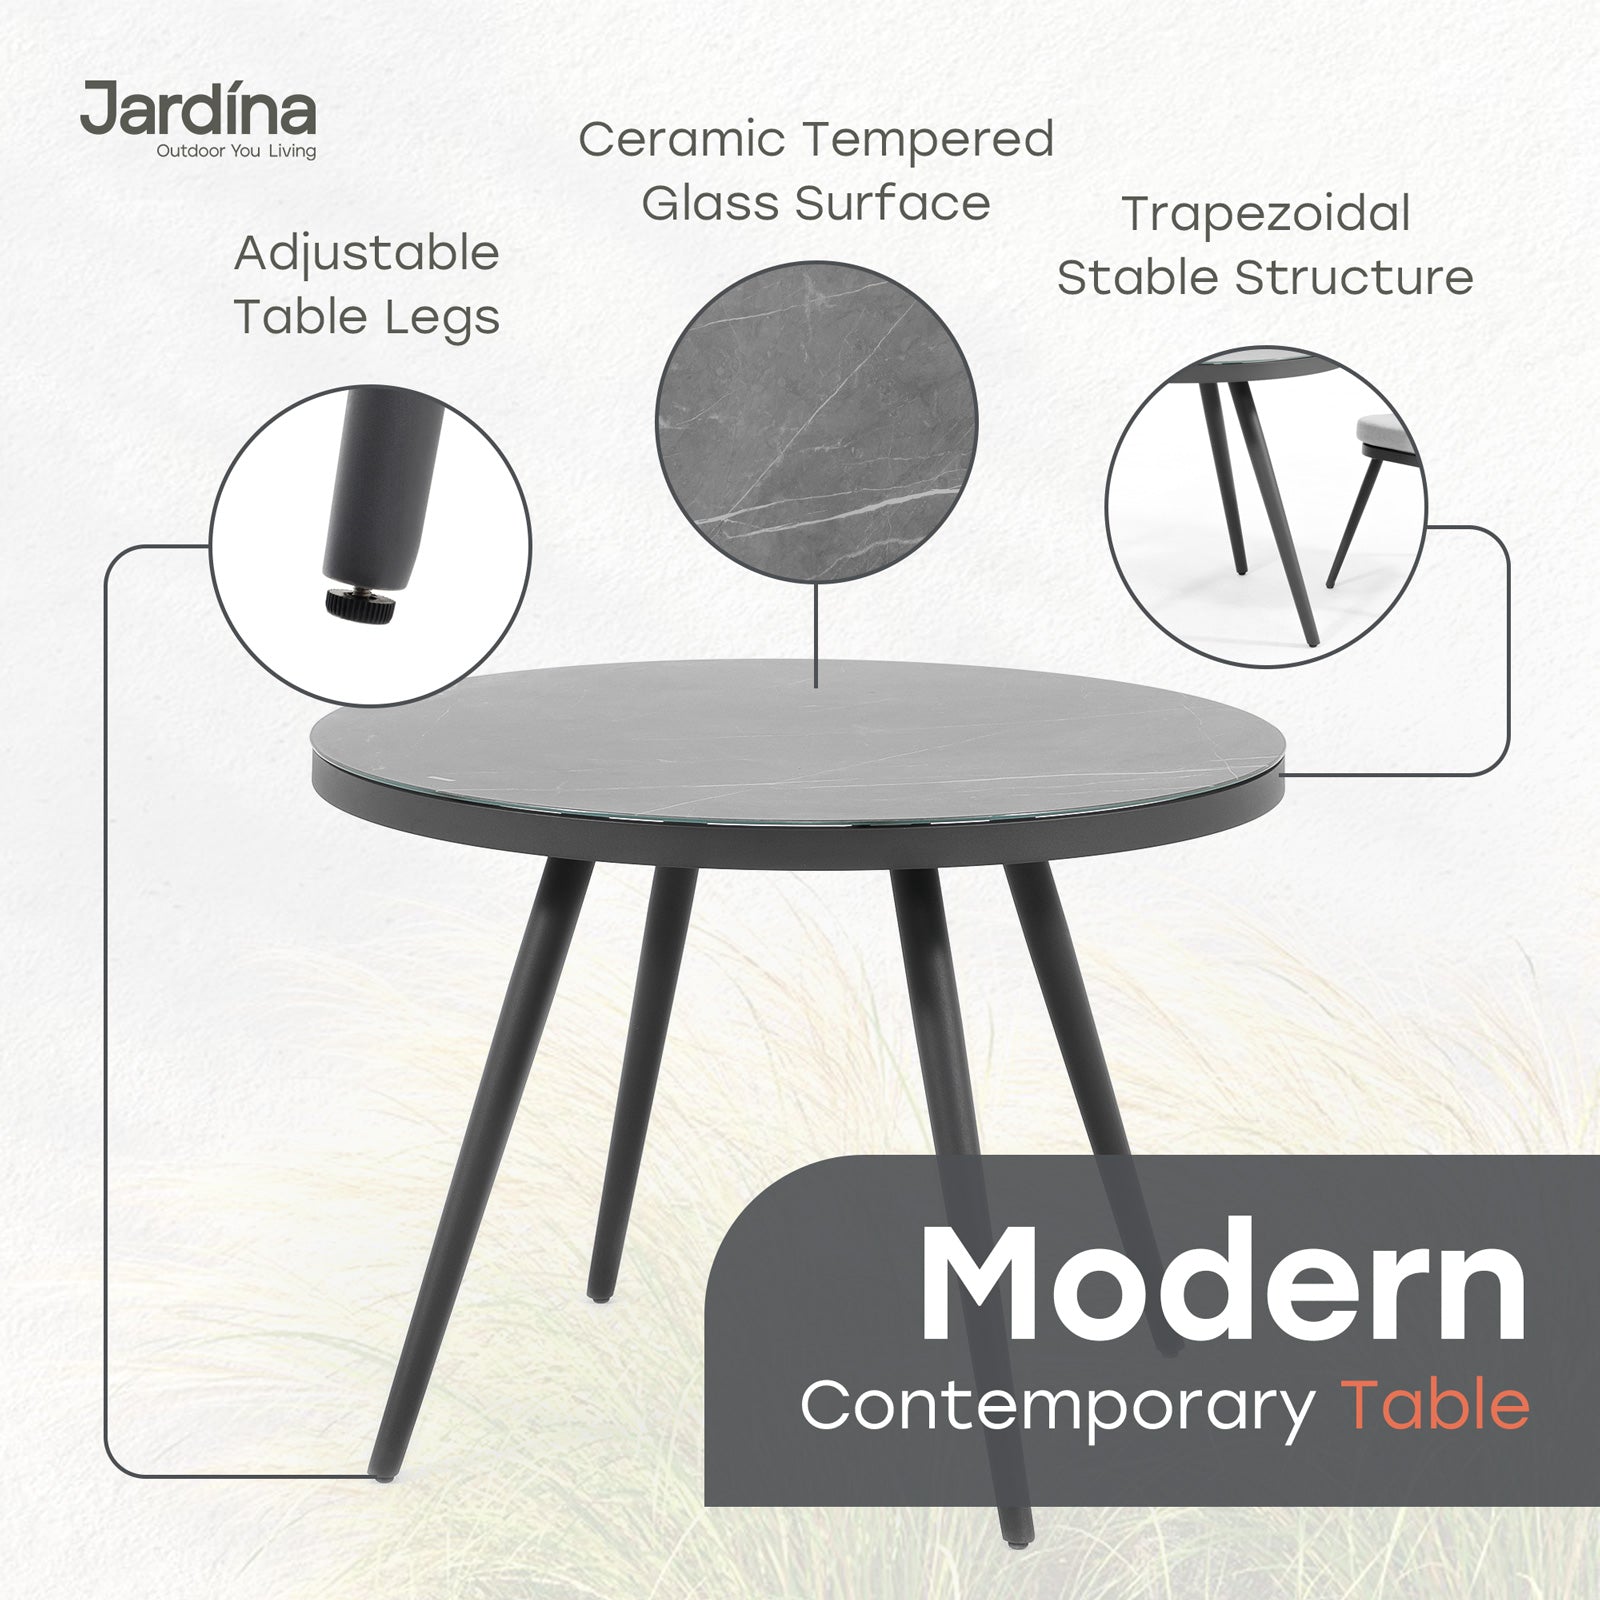 modern alumunum outdoor table with ceramic tempered glass top